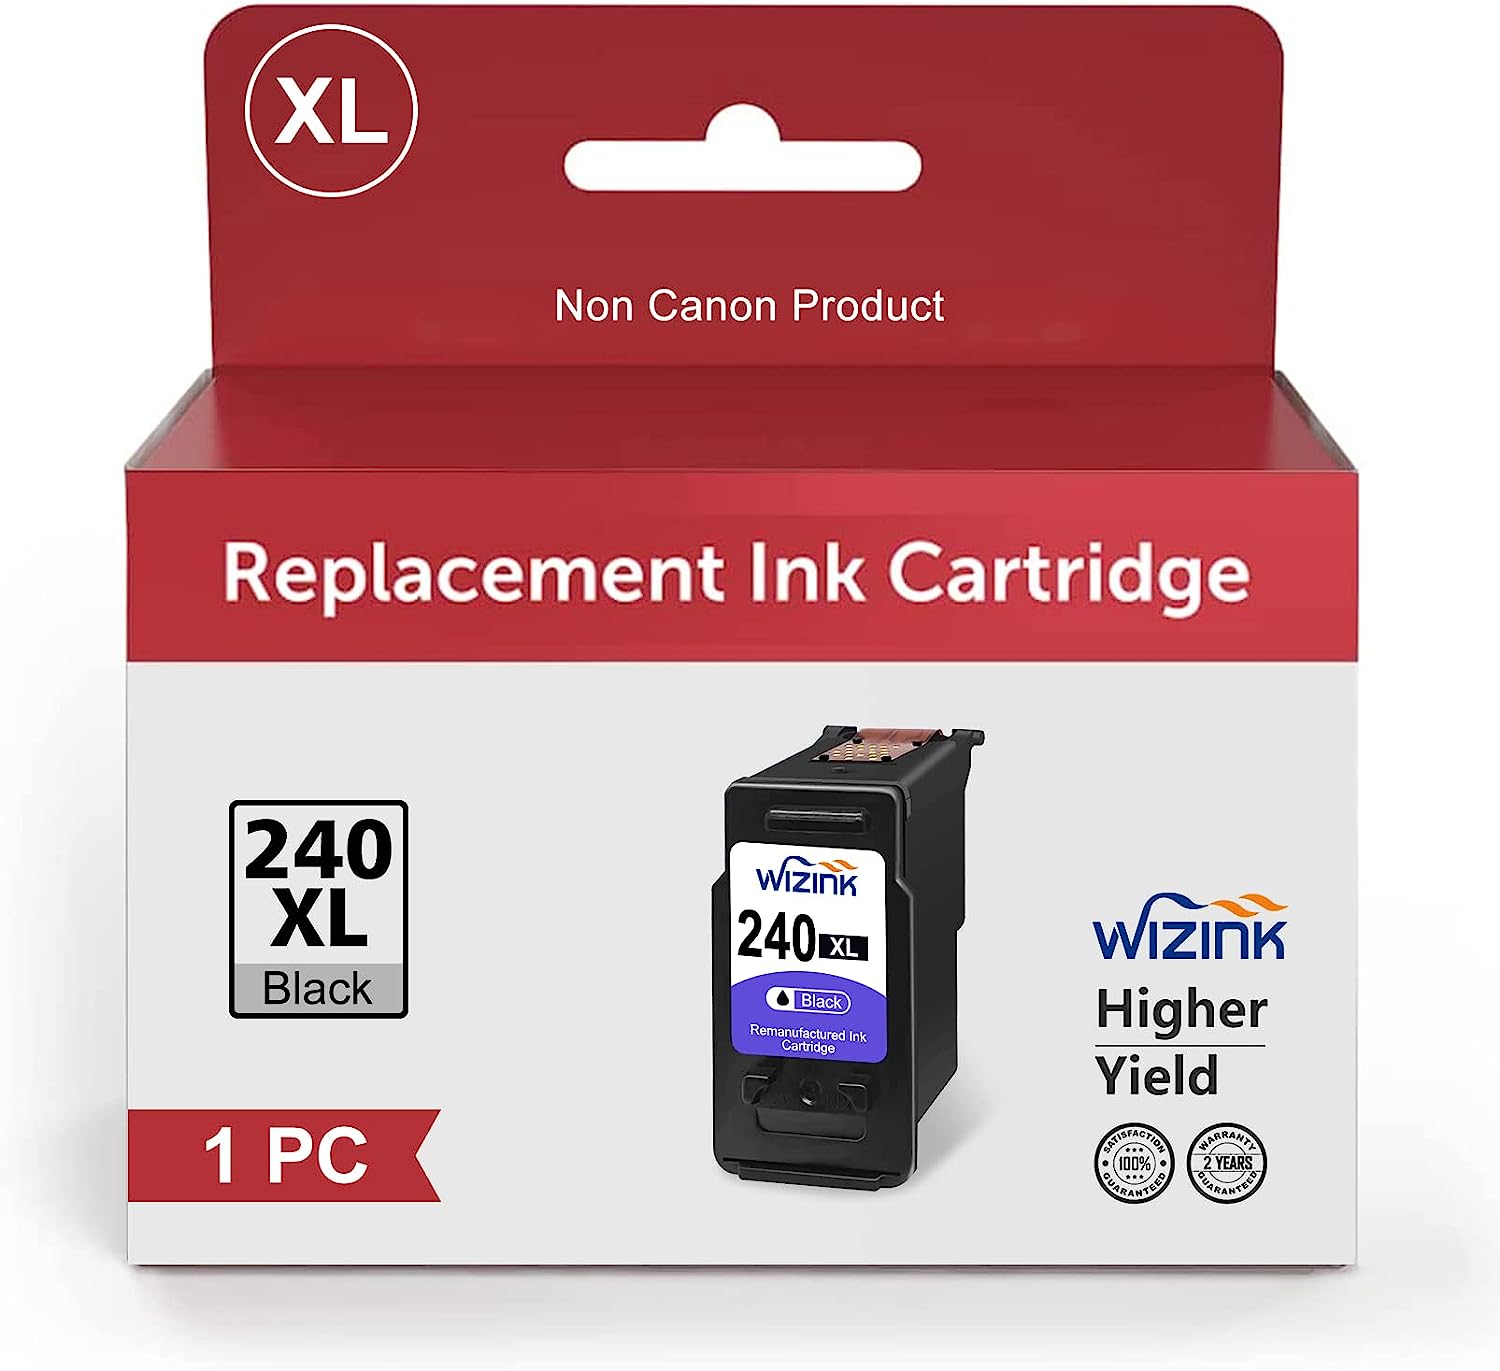 Ink Cartridges PG-240 XL Wzink for Cannon Printer Ink [...]